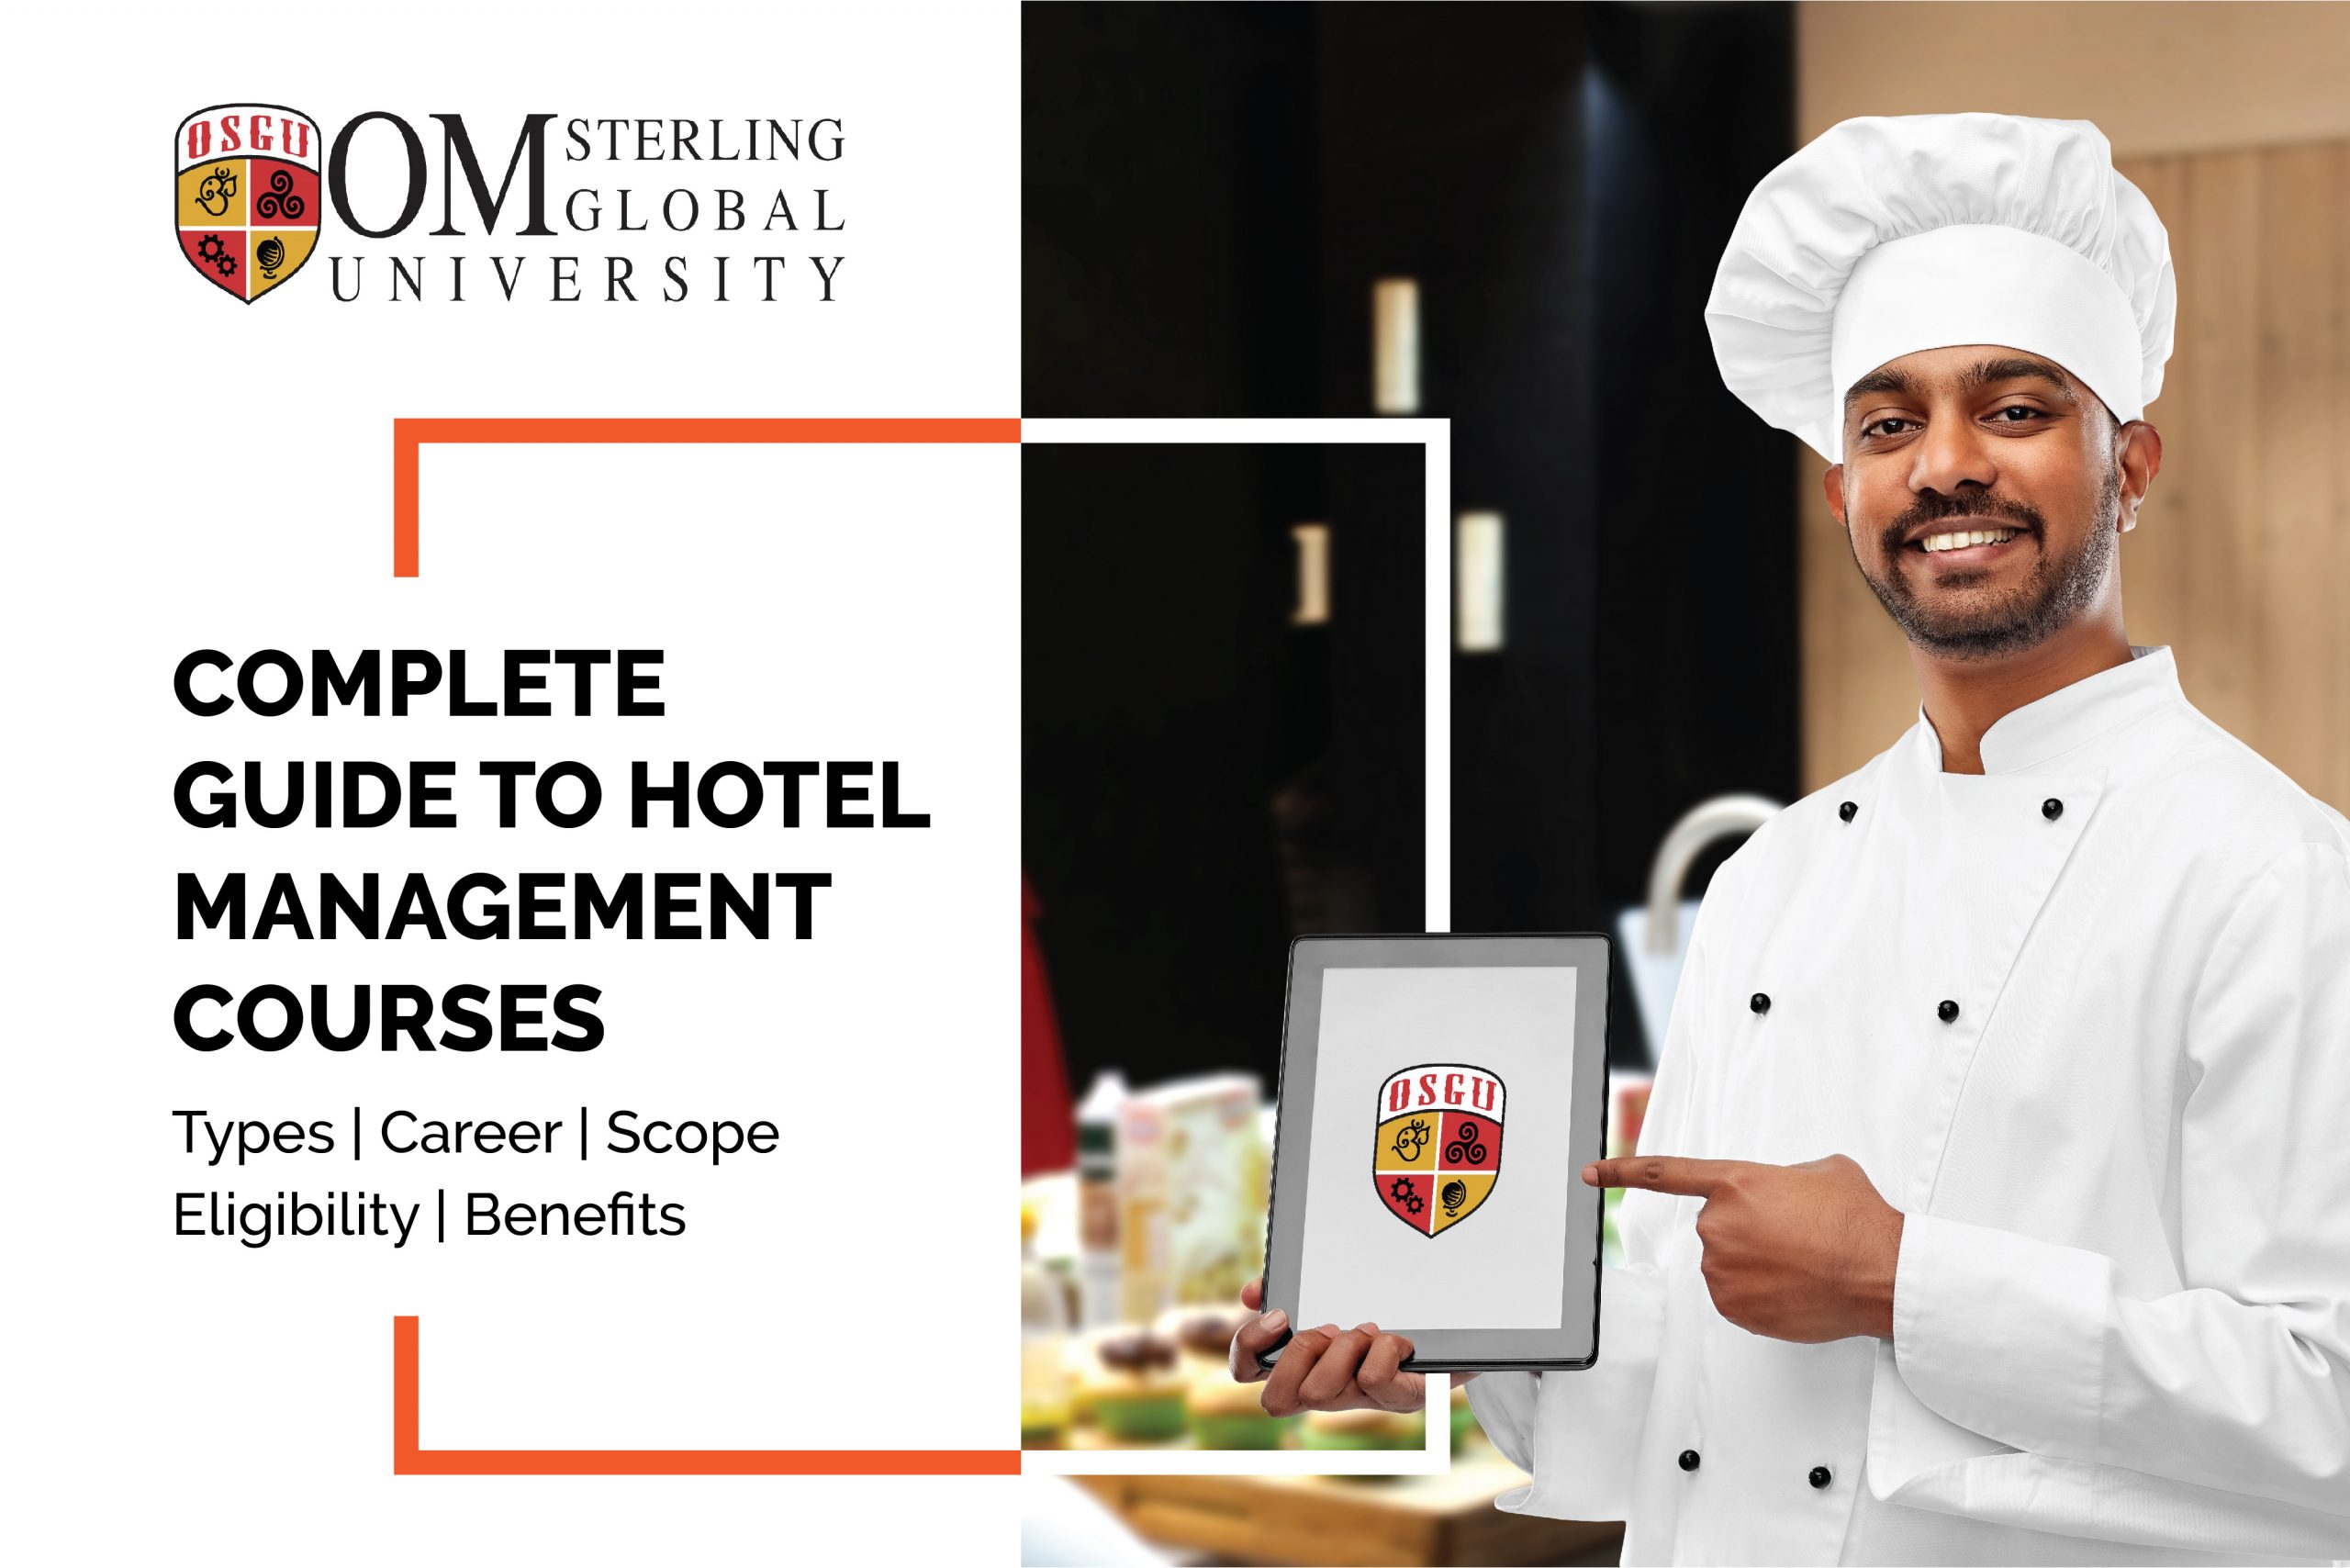 hotel management and tourism studies